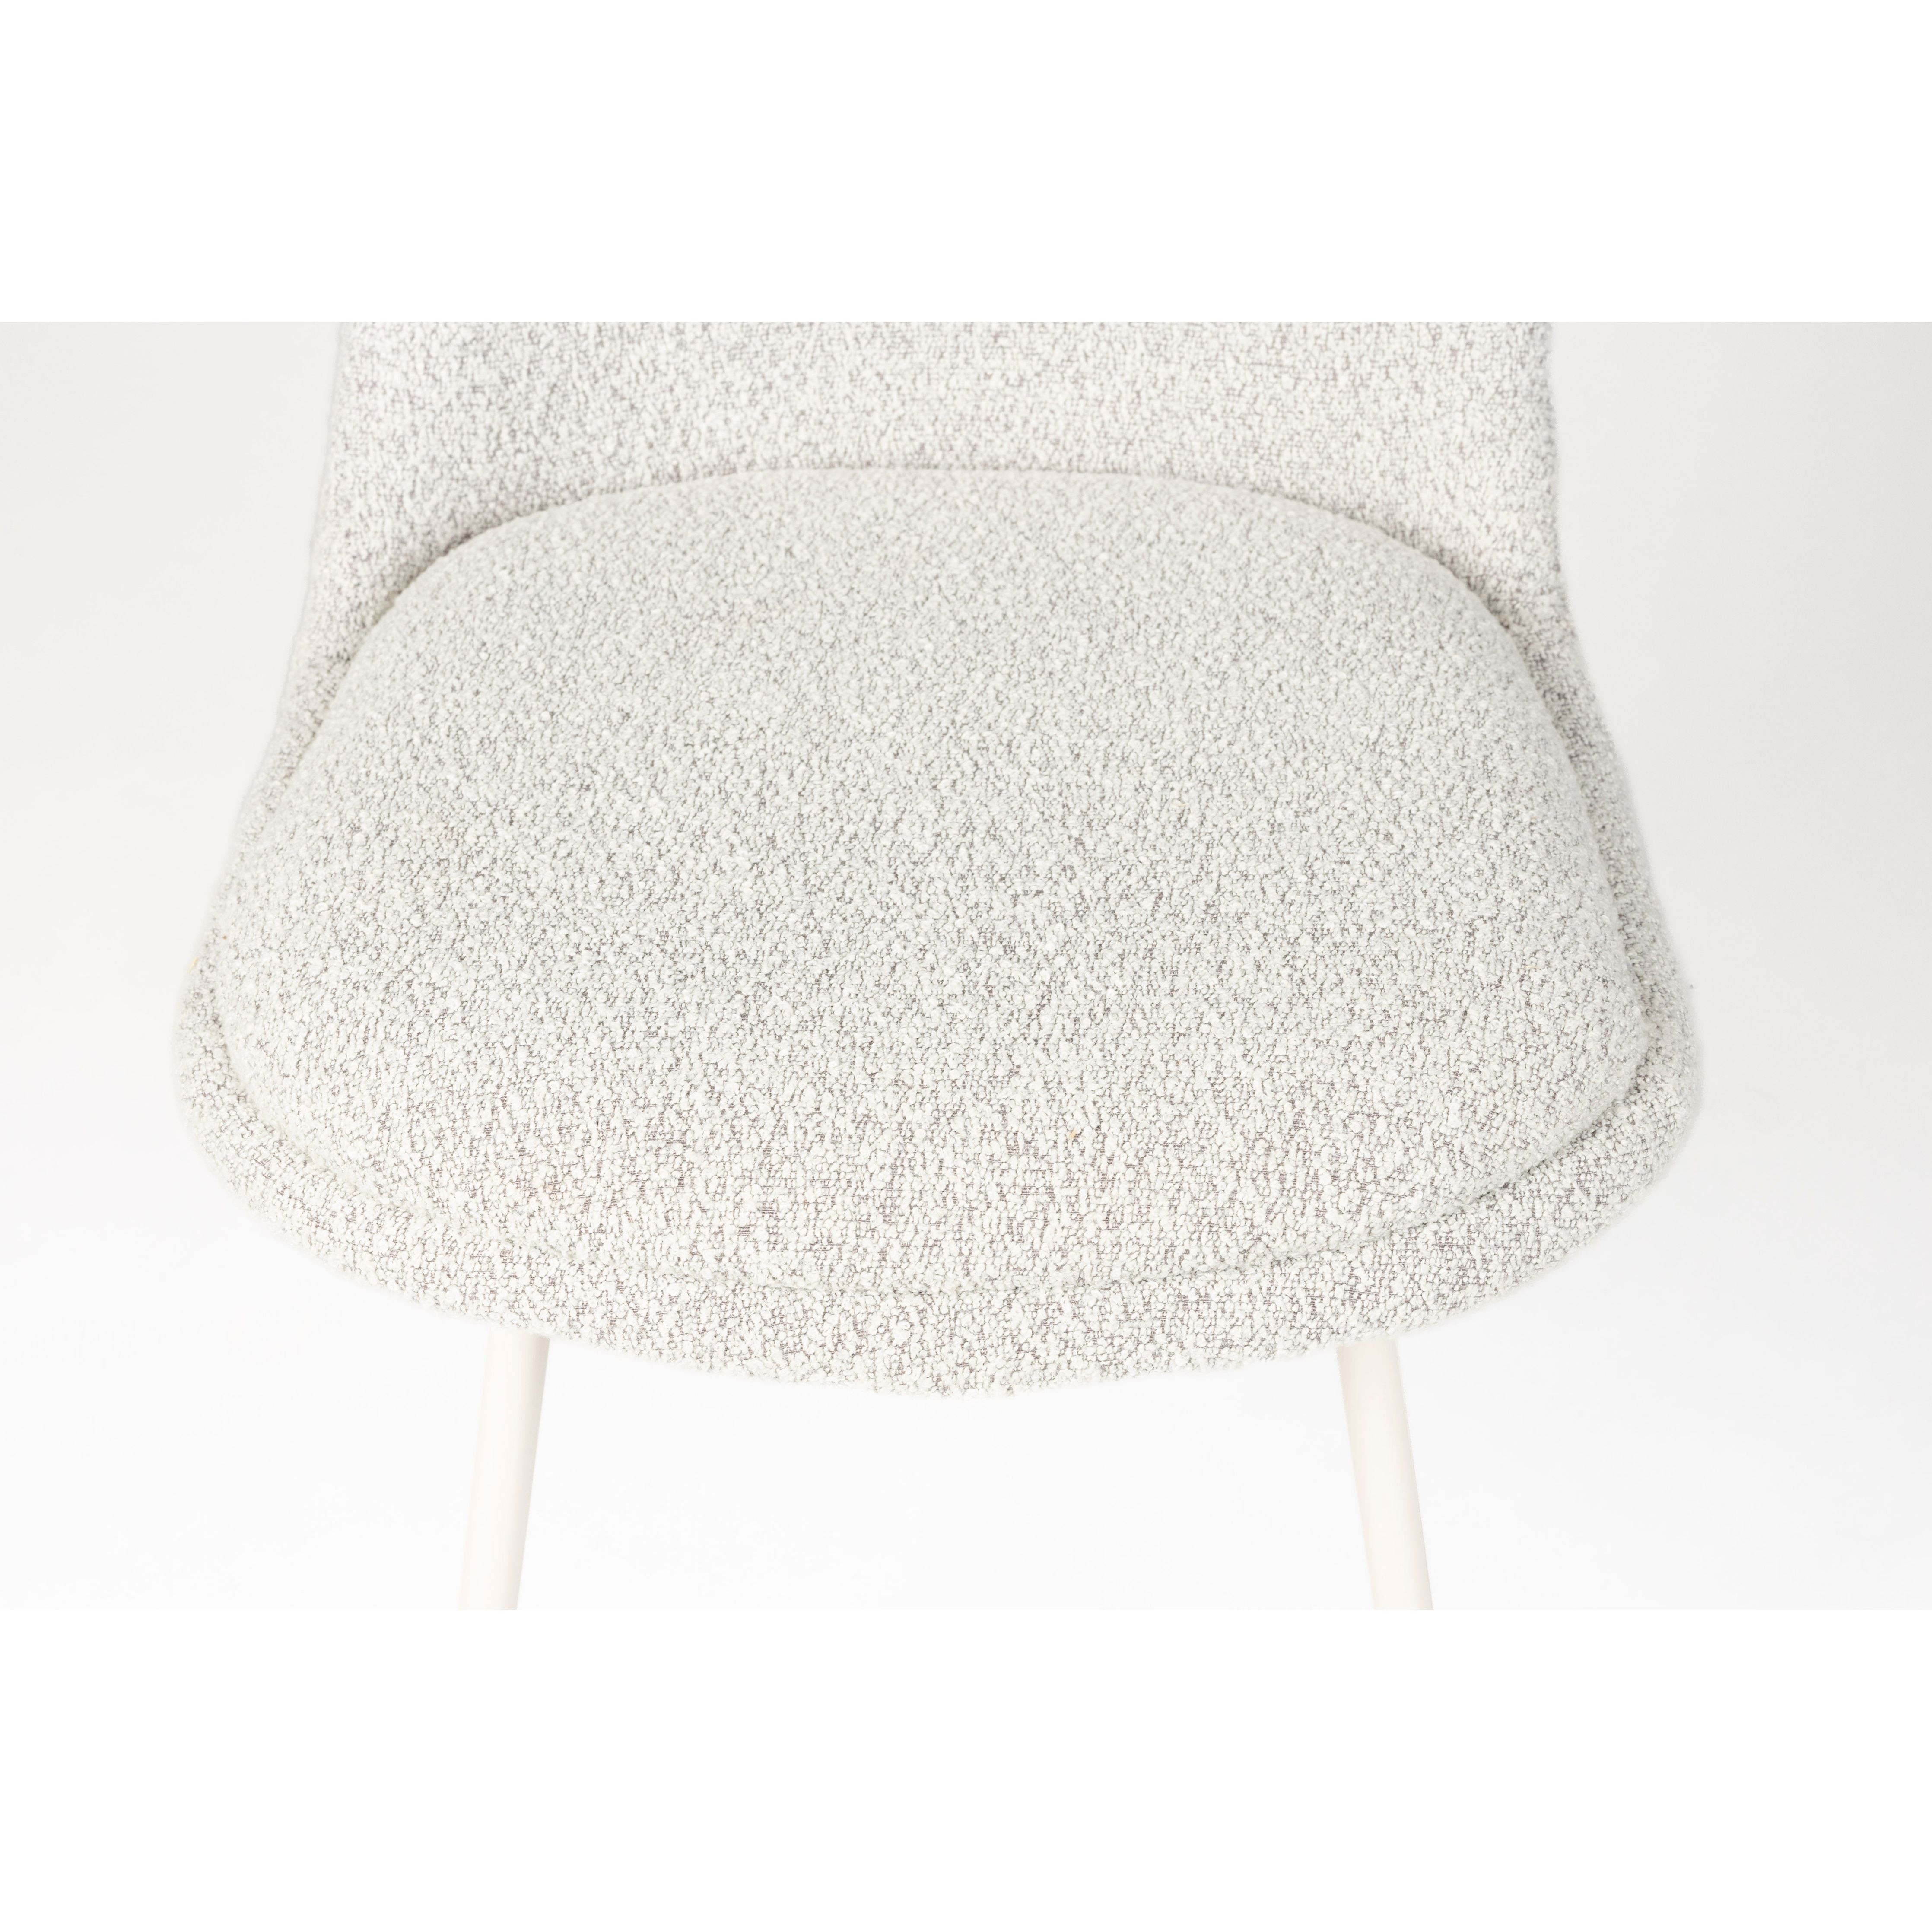 Chair fijs off white | 2 pieces